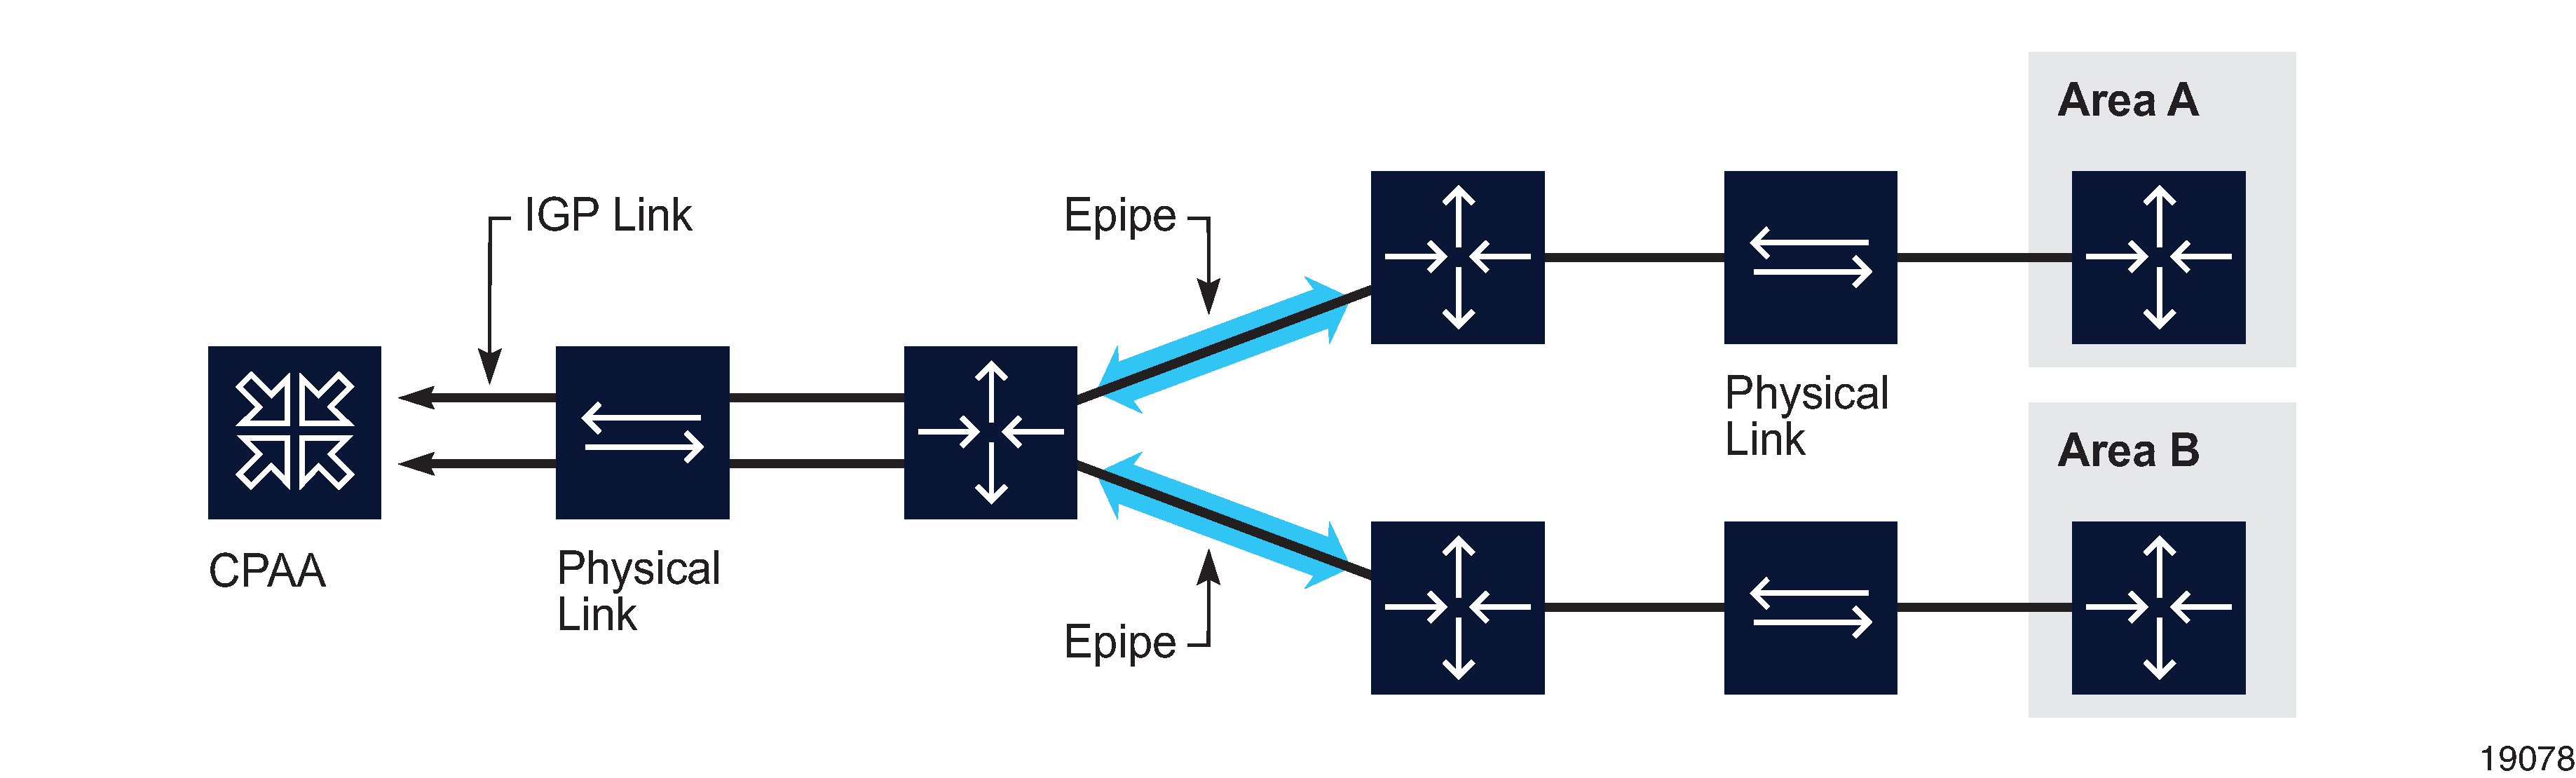 CPAAs connected to routing areas through VLL Epipes